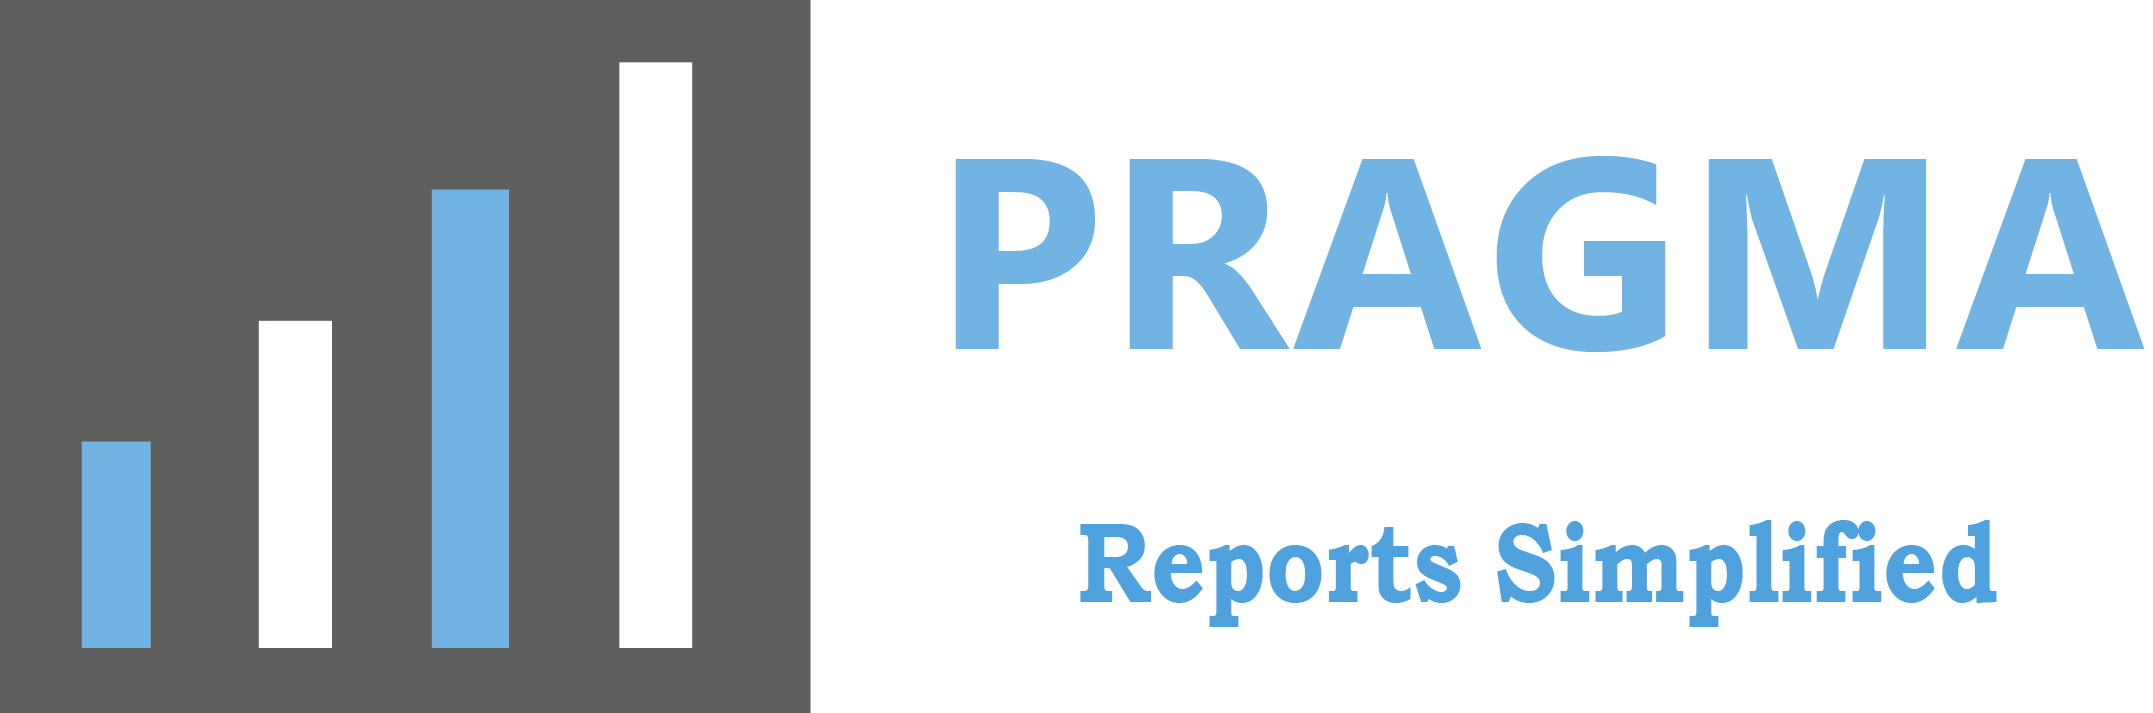 https://www.pragmamarketresearch.com/reports/119562/global-pharmaceutical-blister-packaging-market/inquiry?UTM=PRohit